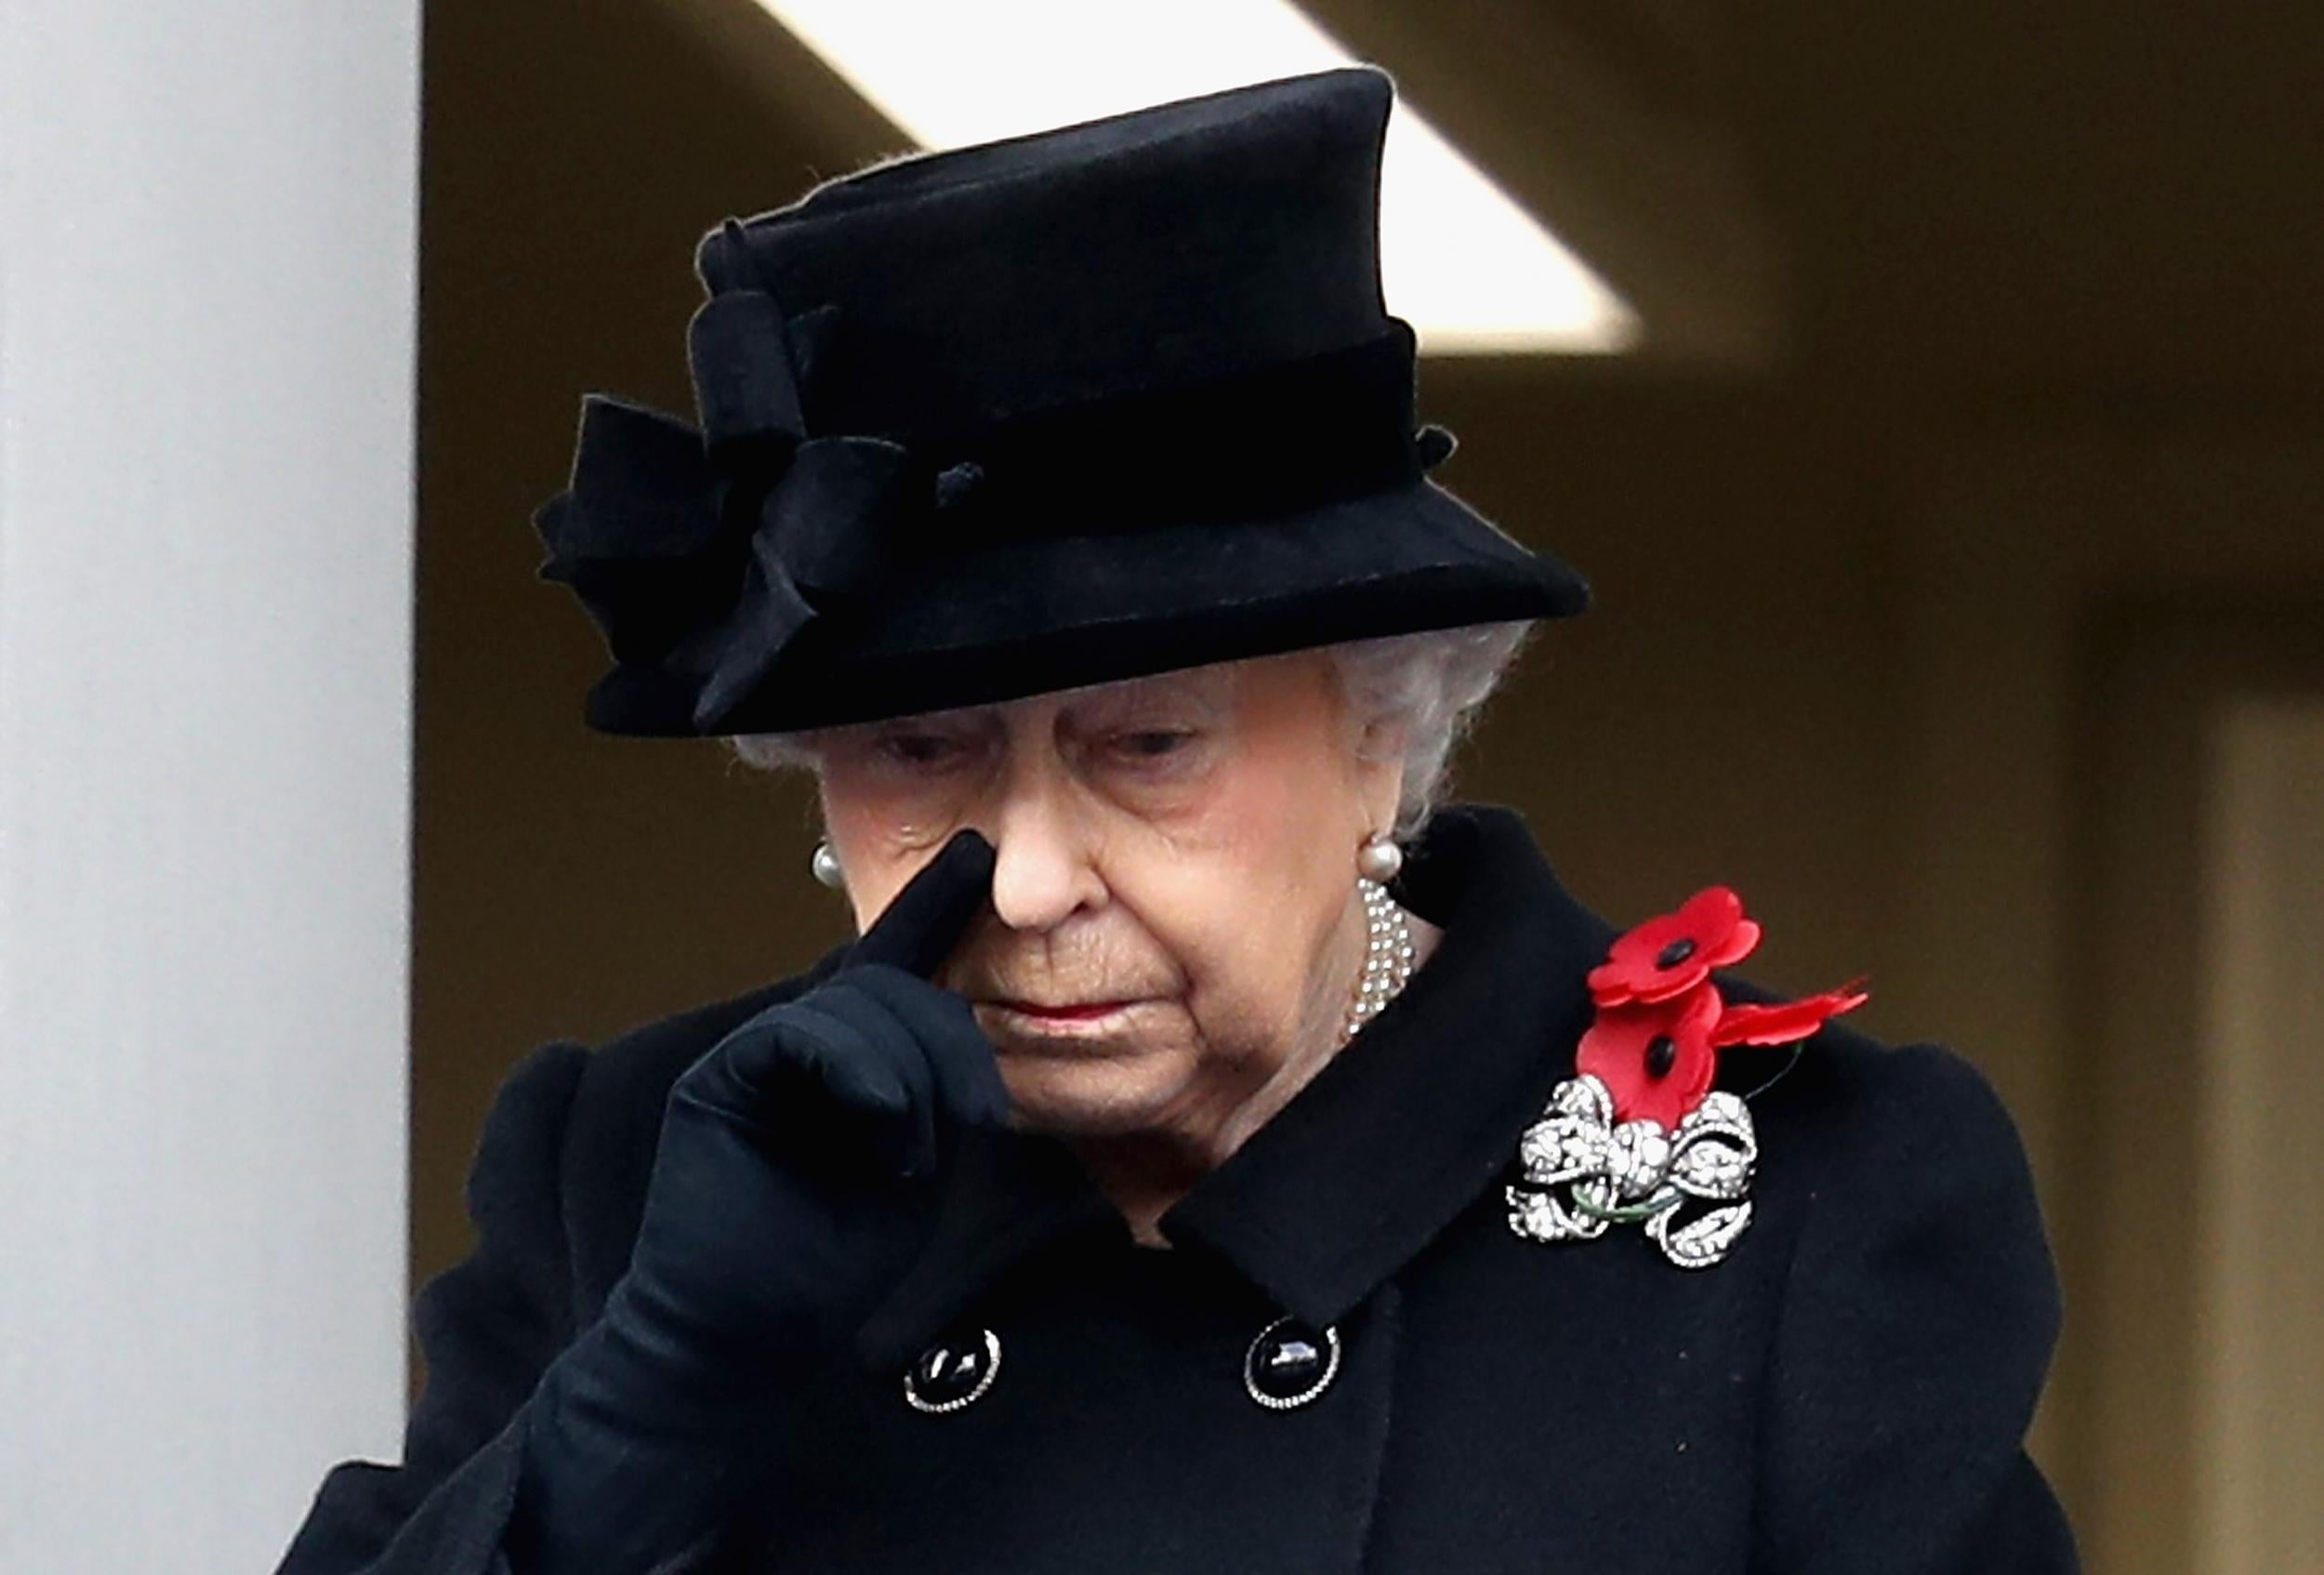 The Queen appeared to shed a tear as she watched the service from a balcony (Getty)